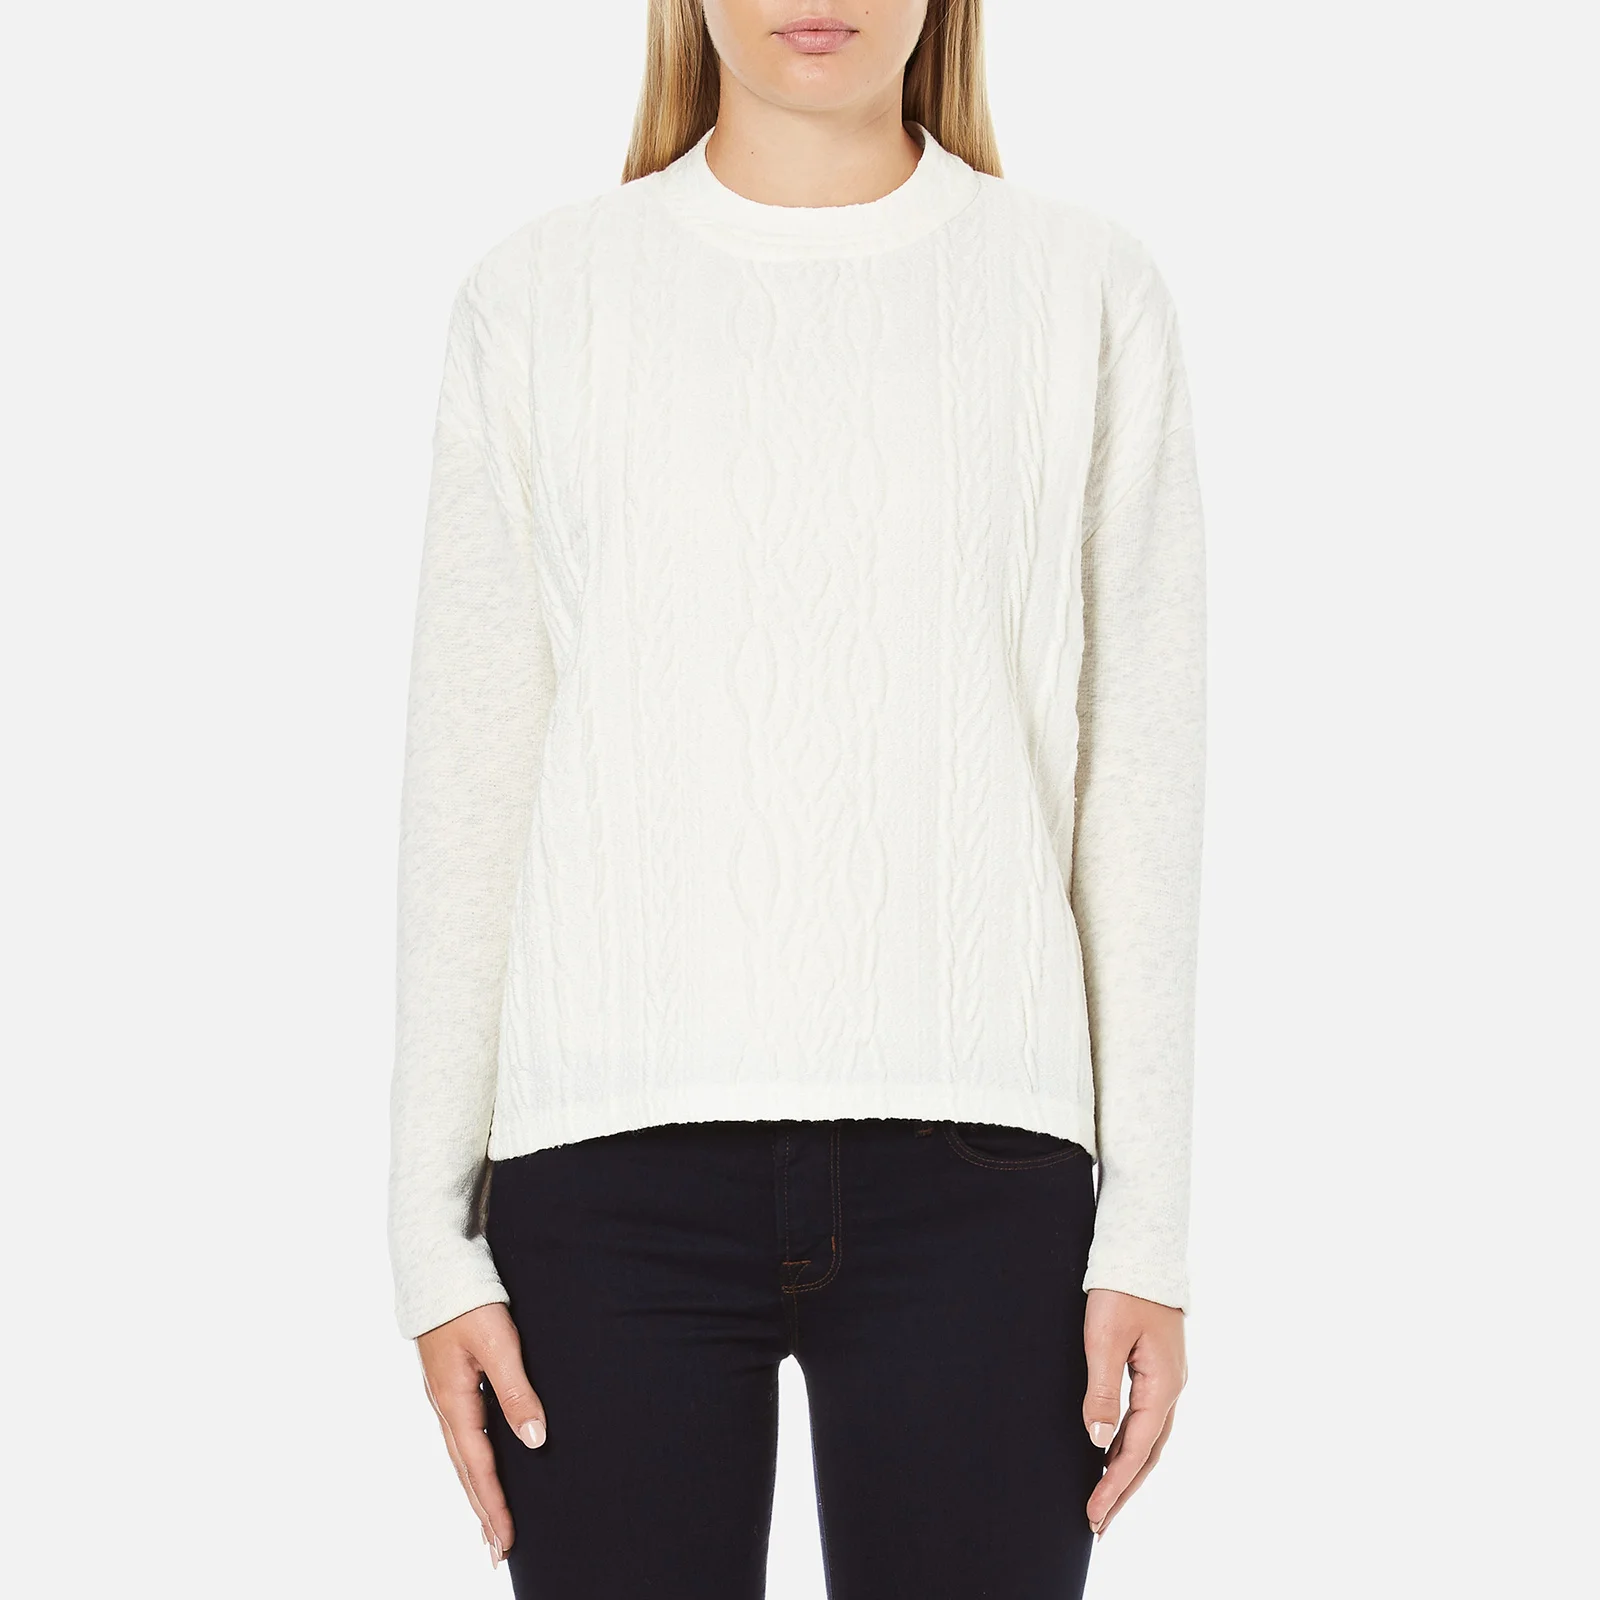 Maison Scotch Women's High Neck Sweatshirt with Special Textured Woven Front - White Image 1